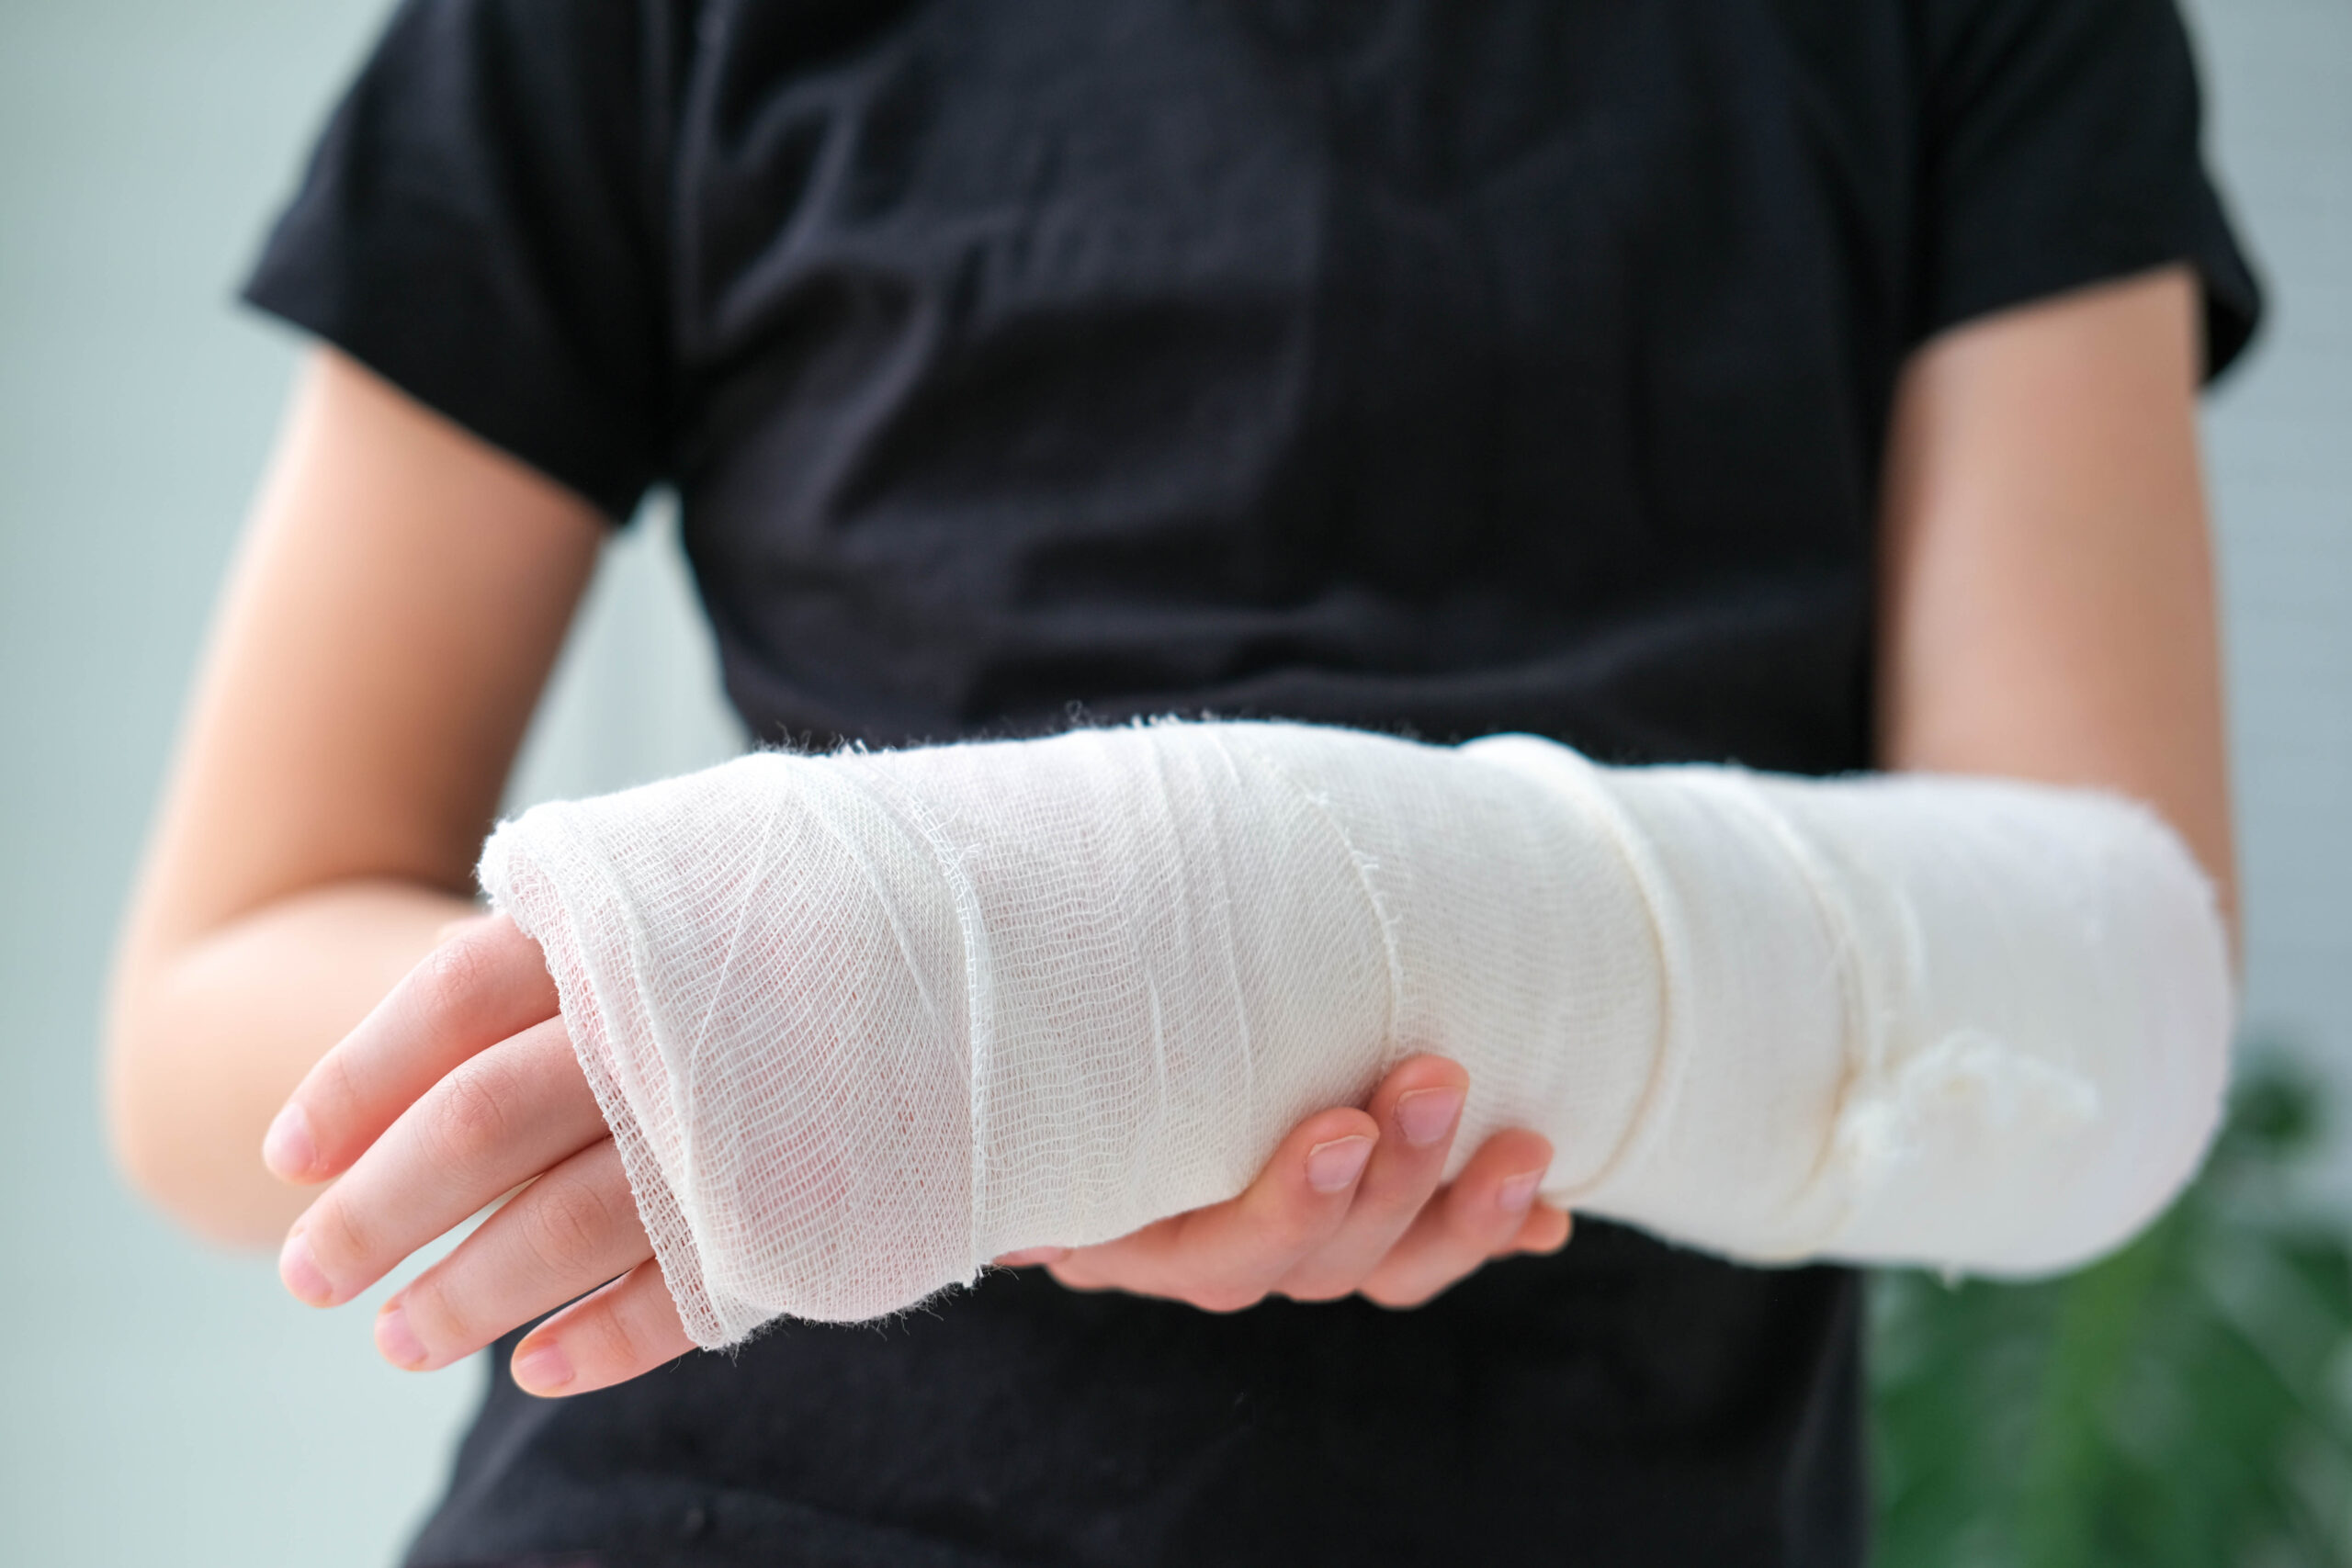 Pedestrian accident claims - victim with a broken arm in a cast